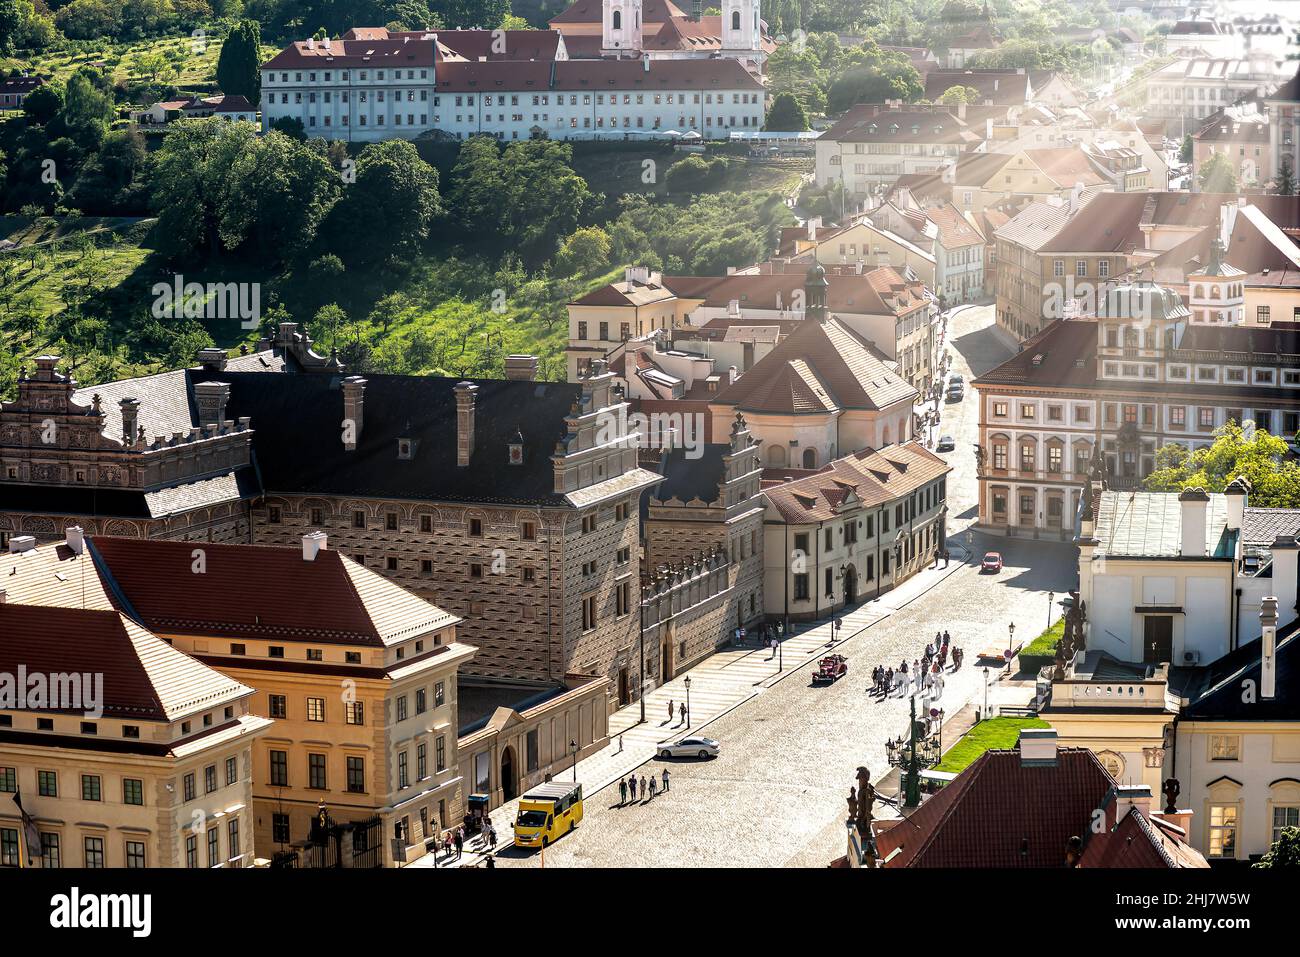 View of Hradcany Square and Church of St. Benedict. Prague, Czech Republic Stock Photo